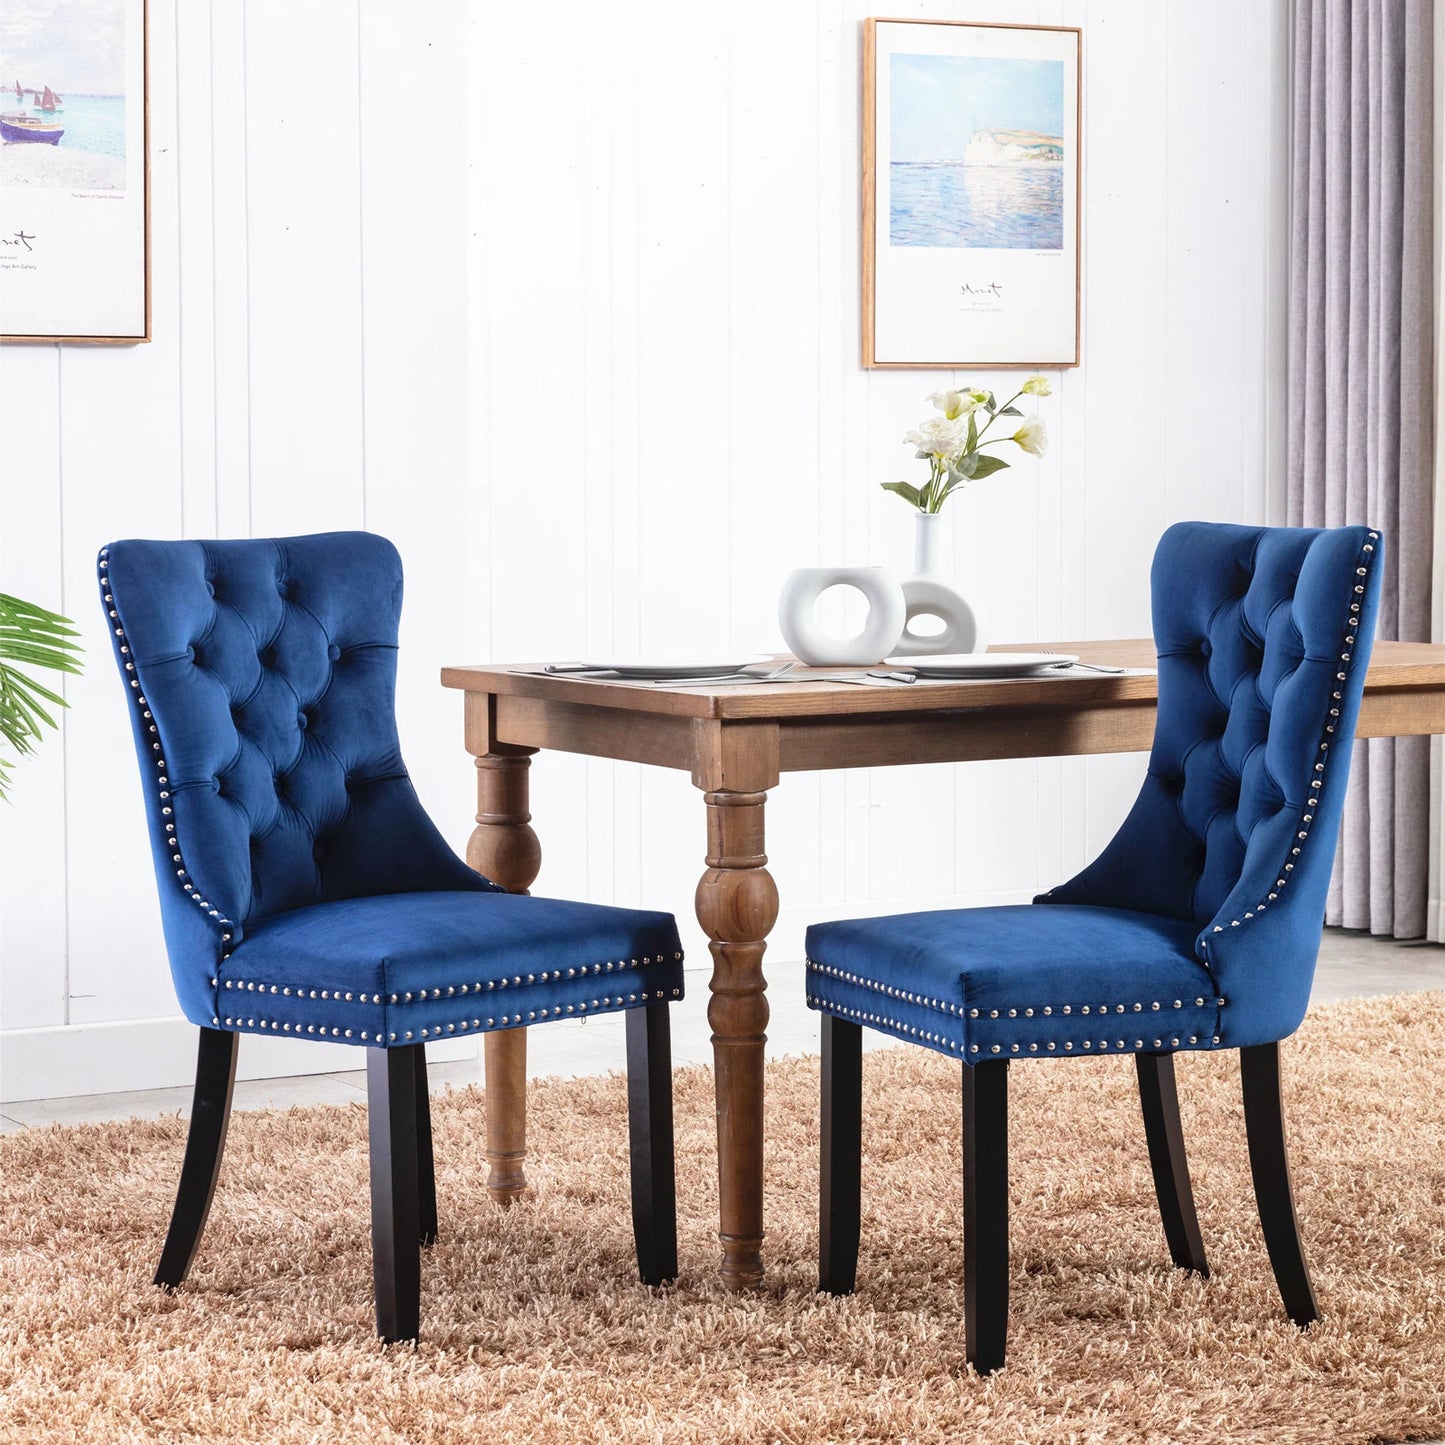 nikki collection modern high-end tufted dining chairs 2-pcs set, blue